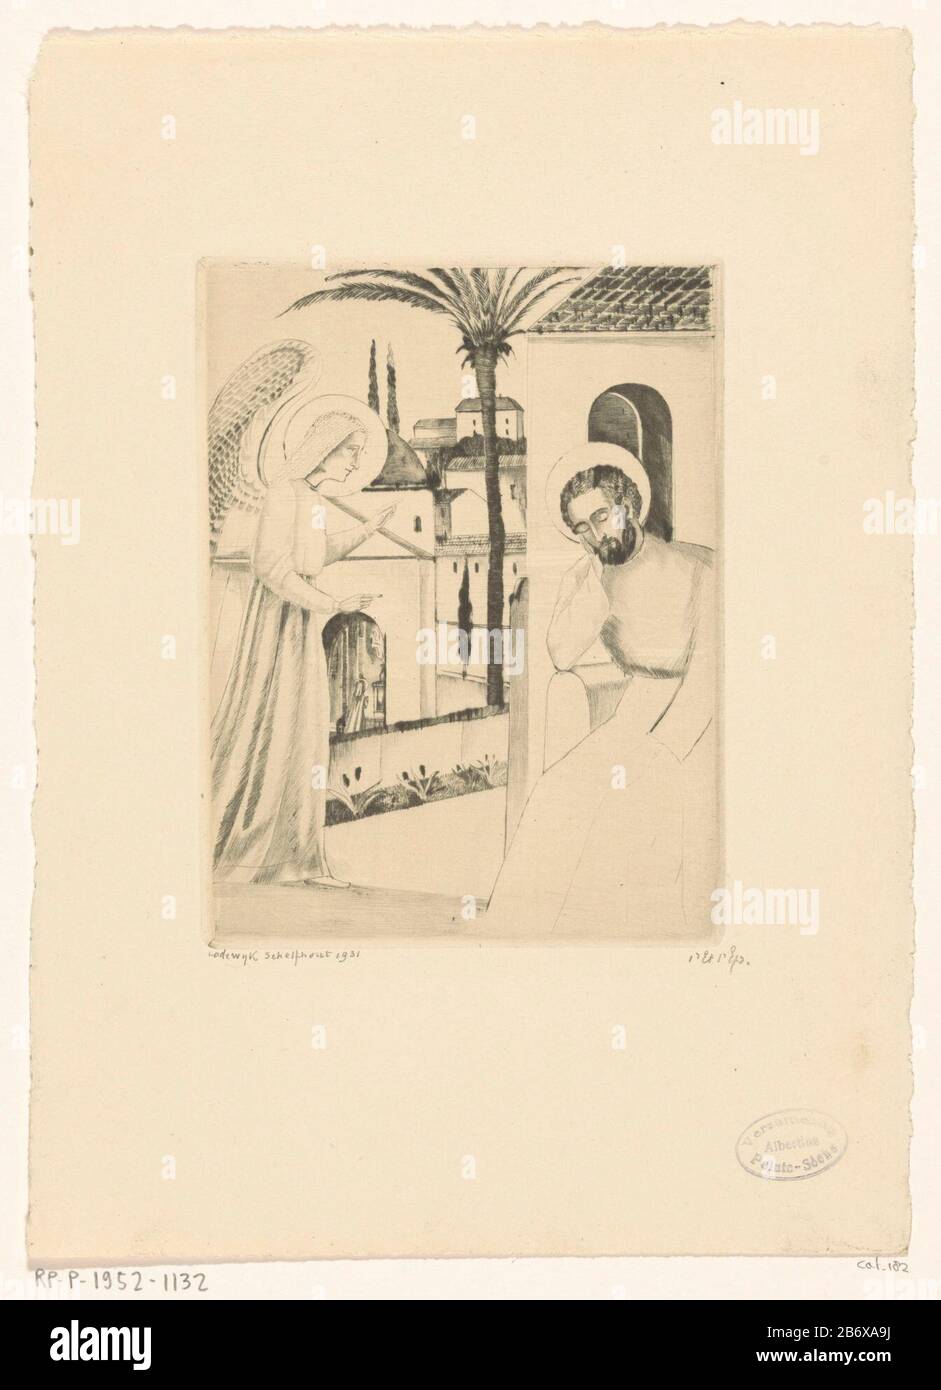 Right foreground Joseph, asleep on a bench in a garden. Left the archangel Gabriel, who appears to Joseph in a dream. In the background gebouwen. Manufacturer : printmaker Lodewijk Schelfhout (personally signed) printer: NV Roeloffzen & Hübner Dating: 1931 Physical features: drypoint on copper material: paper Technique: drypoint Dimensions: plate edge: H 158 mm × W 121 mm Subject: the foster-father of Christ, Joseph of Nazareth, husband of Mary; possible attributes: flowering rod or wall, lily, yellow carpenter's tools Search Stock Photo